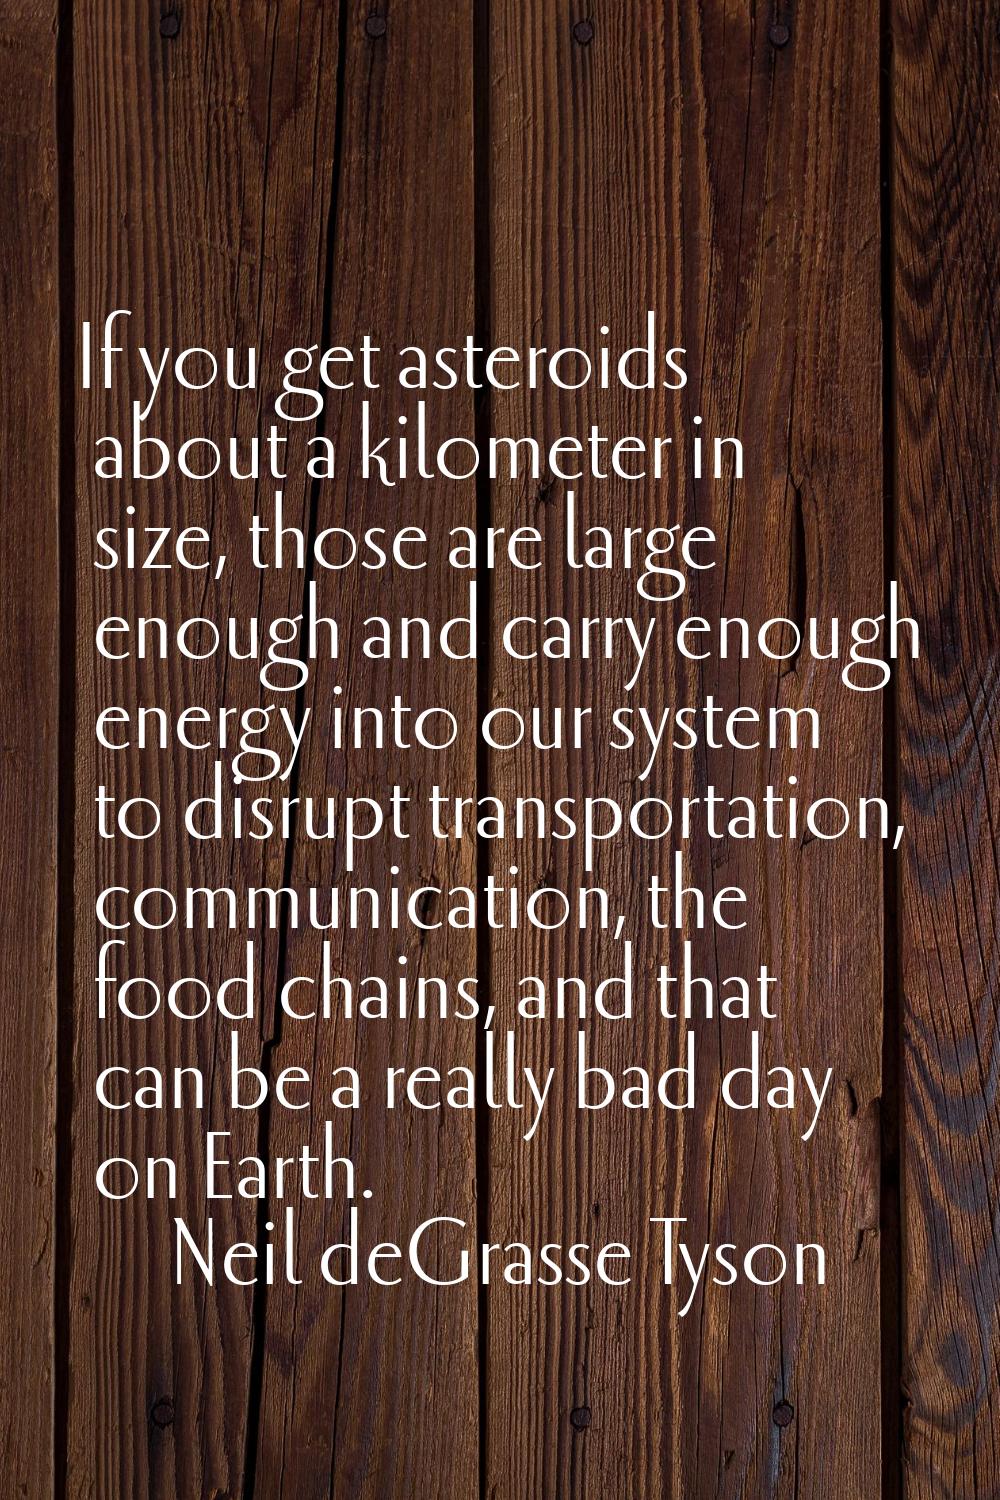 If you get asteroids about a kilometer in size, those are large enough and carry enough energy into